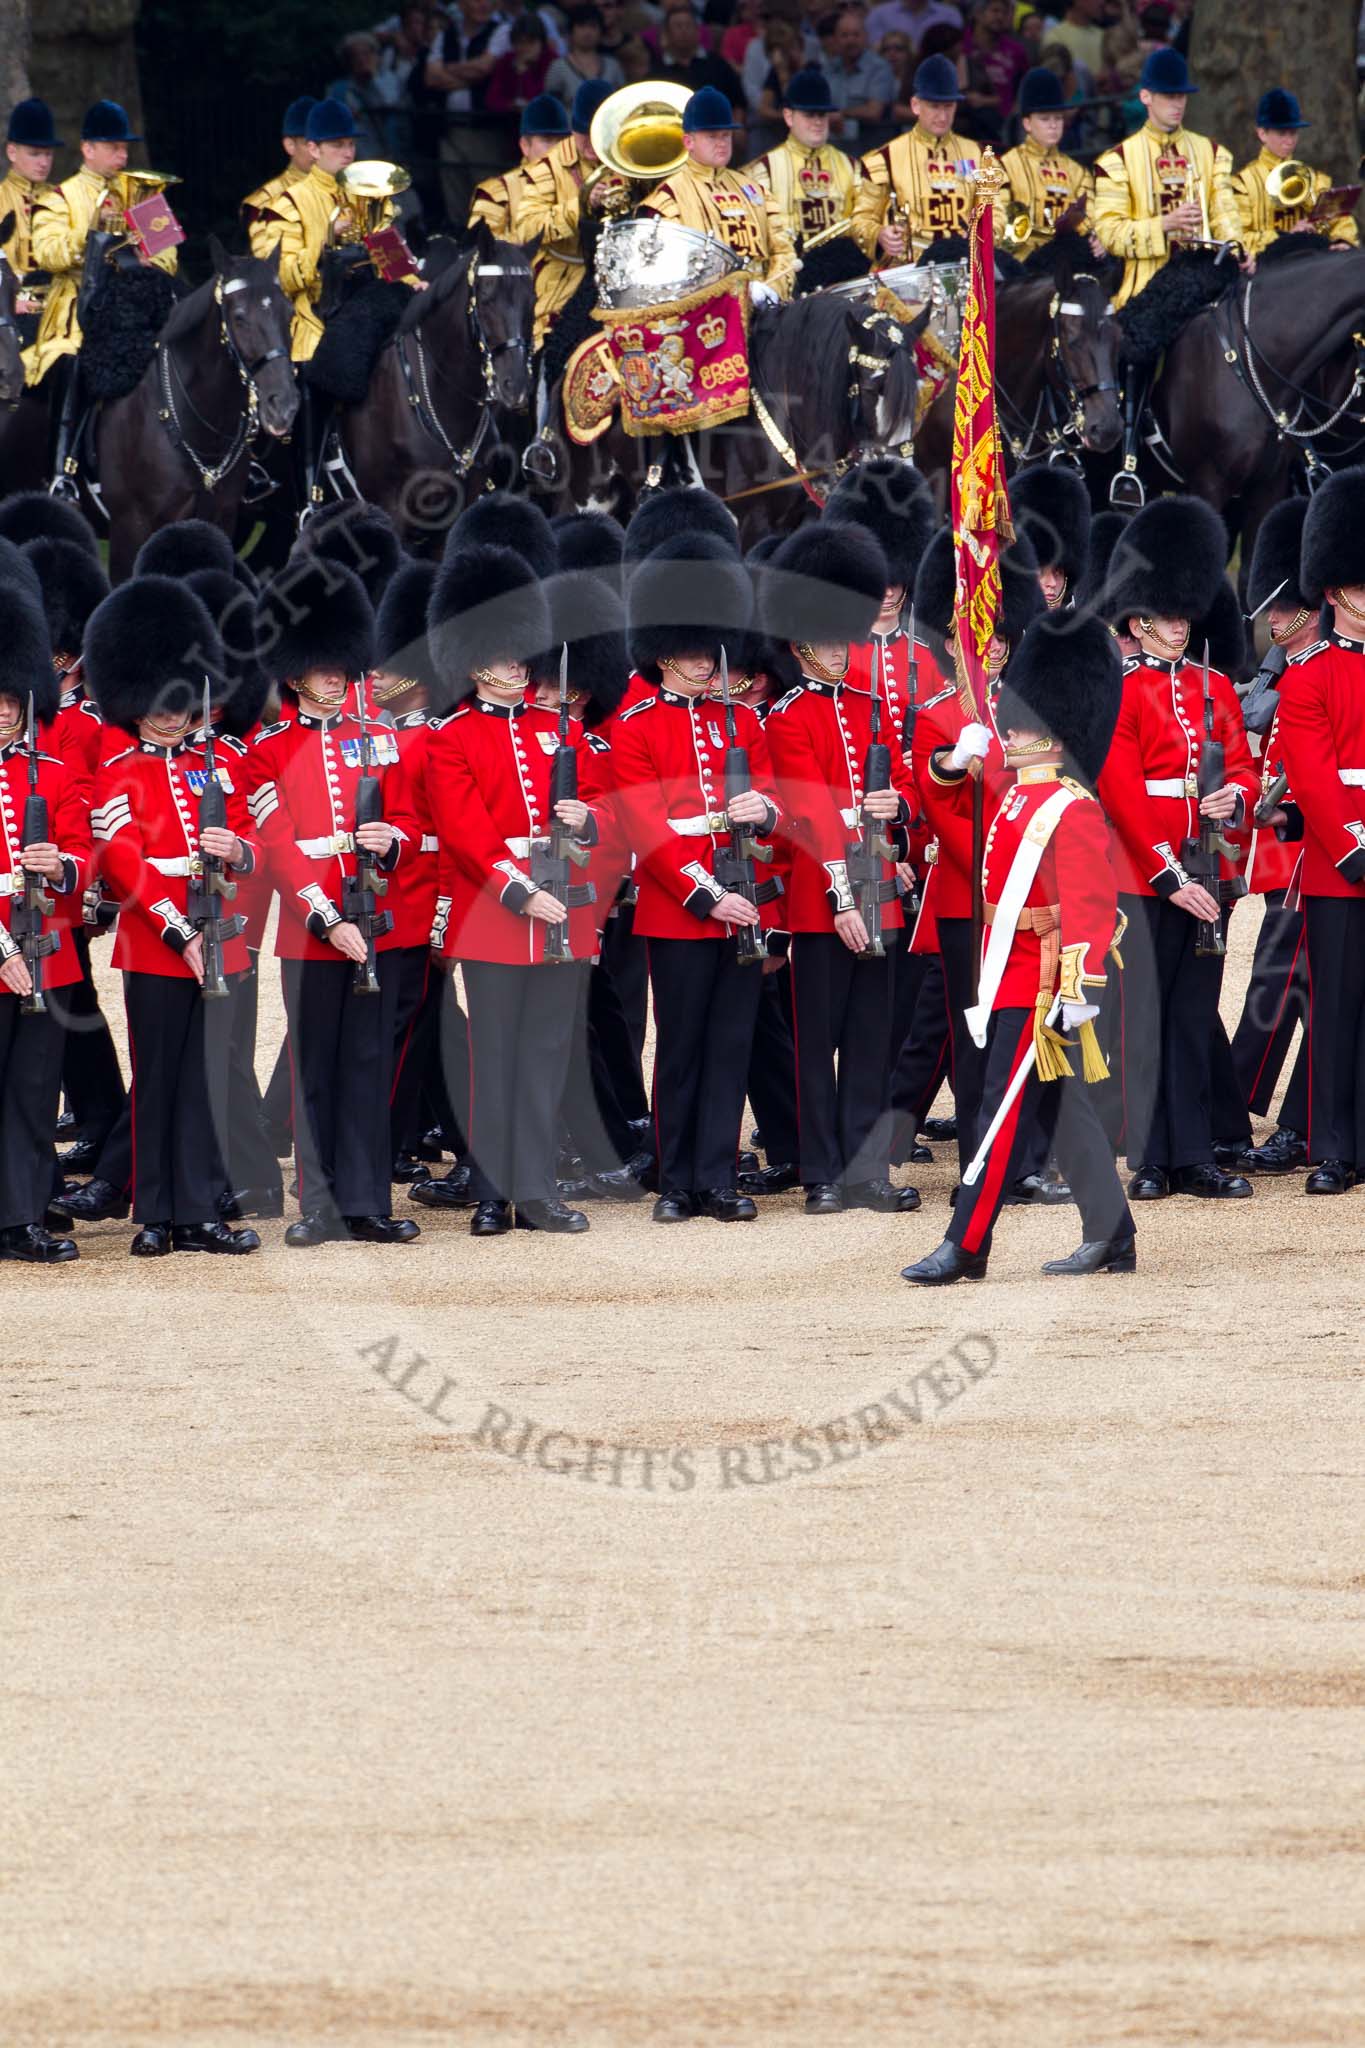 The Colonel's Review 2011: The Esnsign, Tom Ogilvy, is marching in front of the line of guards (here No. 4 Guard, Nijmegen Company Grenadier Guards, whilst the other guardsmen of the Escort are marching between the two lines of guards. In the background the Mounted Bands of the Household Cavalry..
Horse Guards Parade, Westminster,
London SW1,

United Kingdom,
on 04 June 2011 at 11:24, image #144